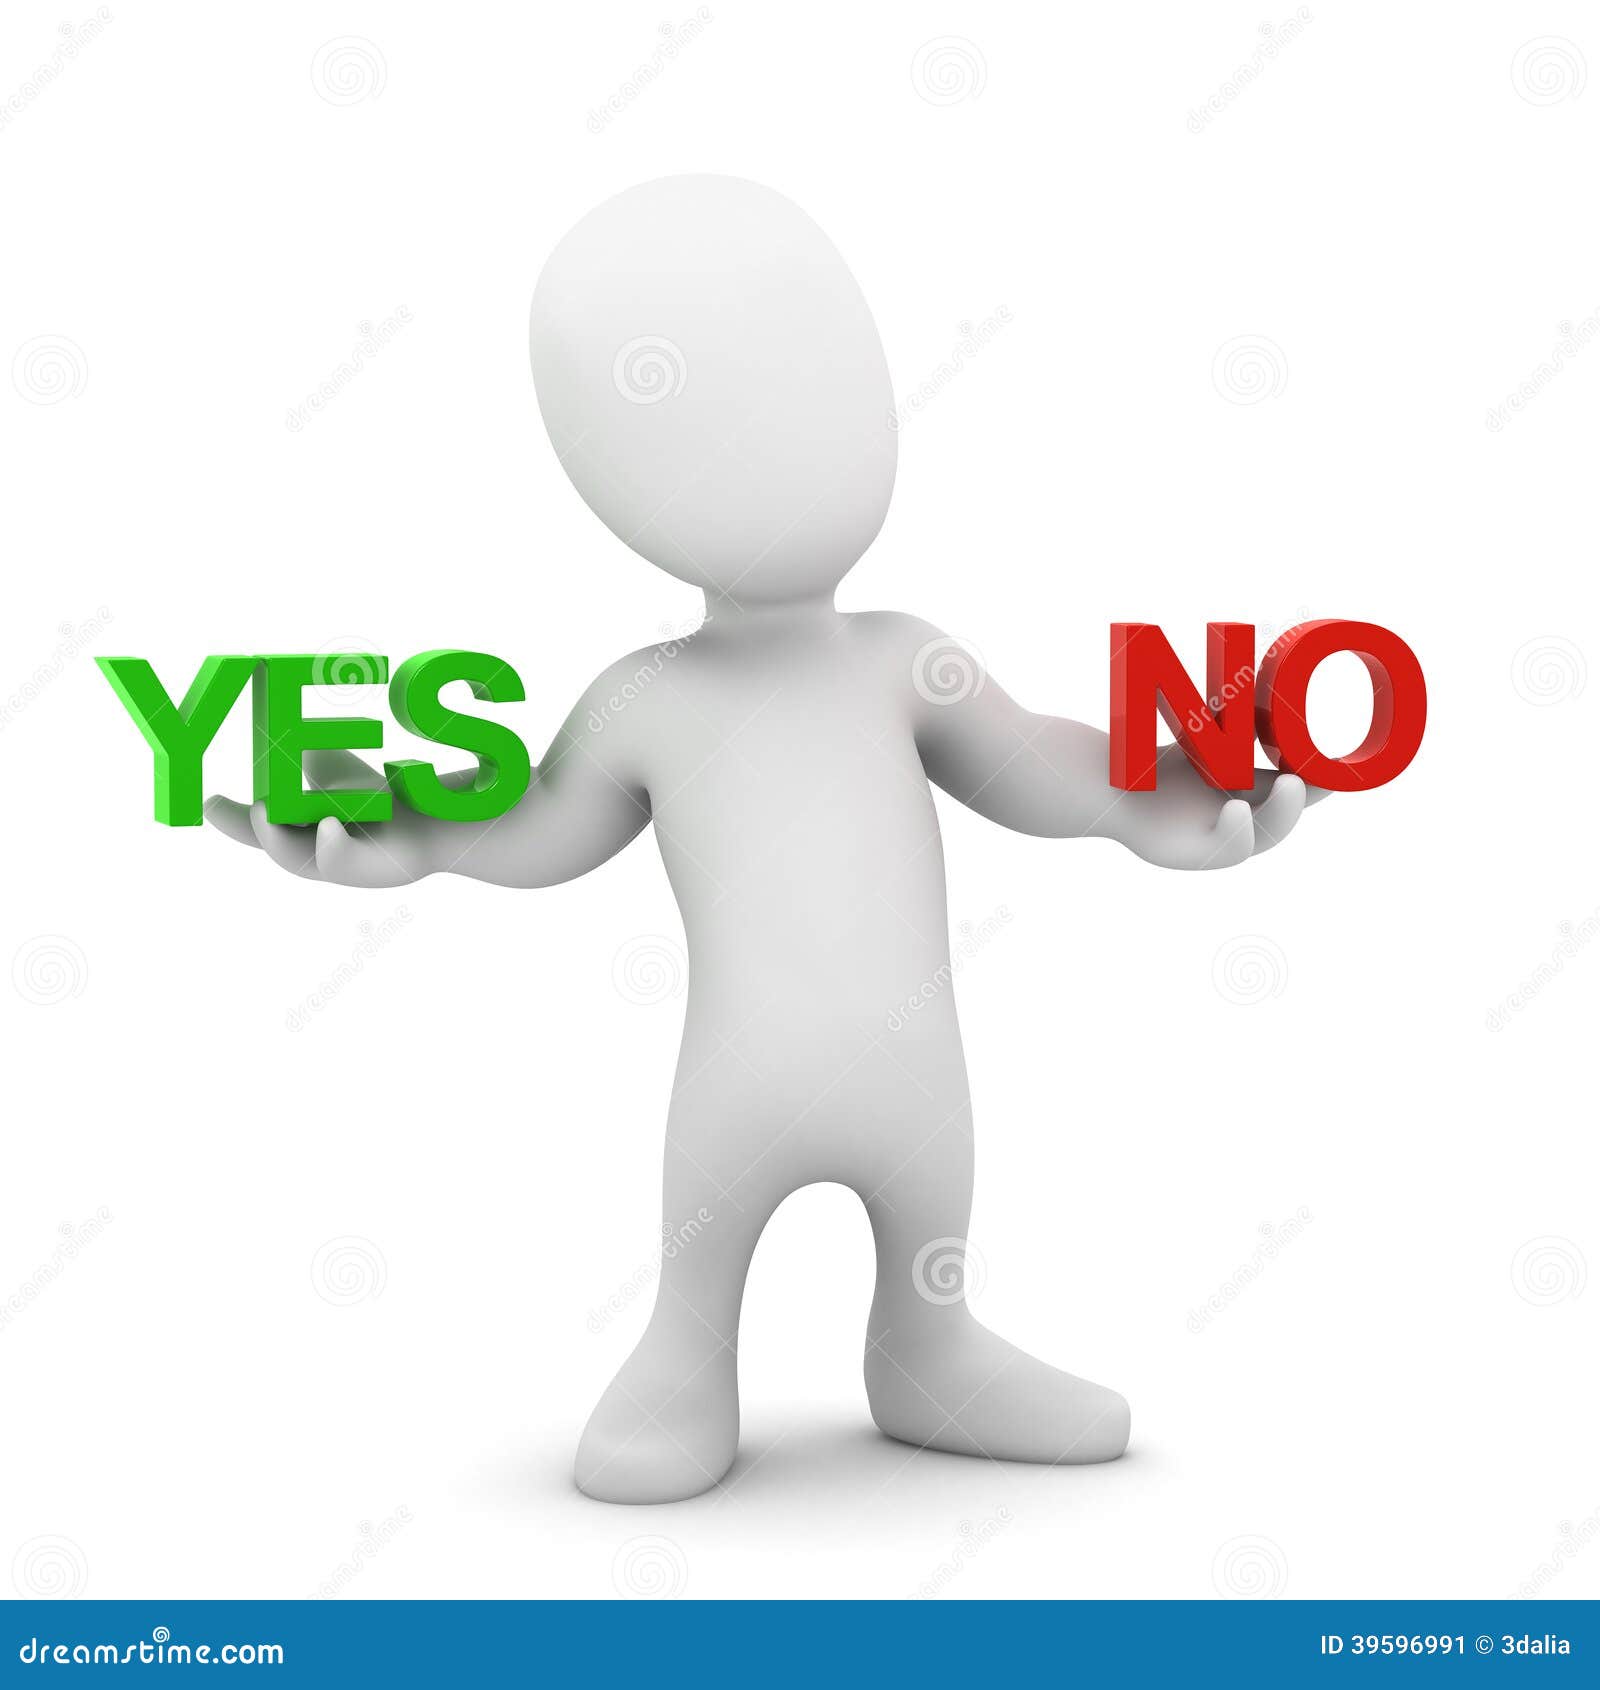 https://thumbs.dreamstime.com/z/d-yes-no-little-man-render-person-holding-39596991.jpg